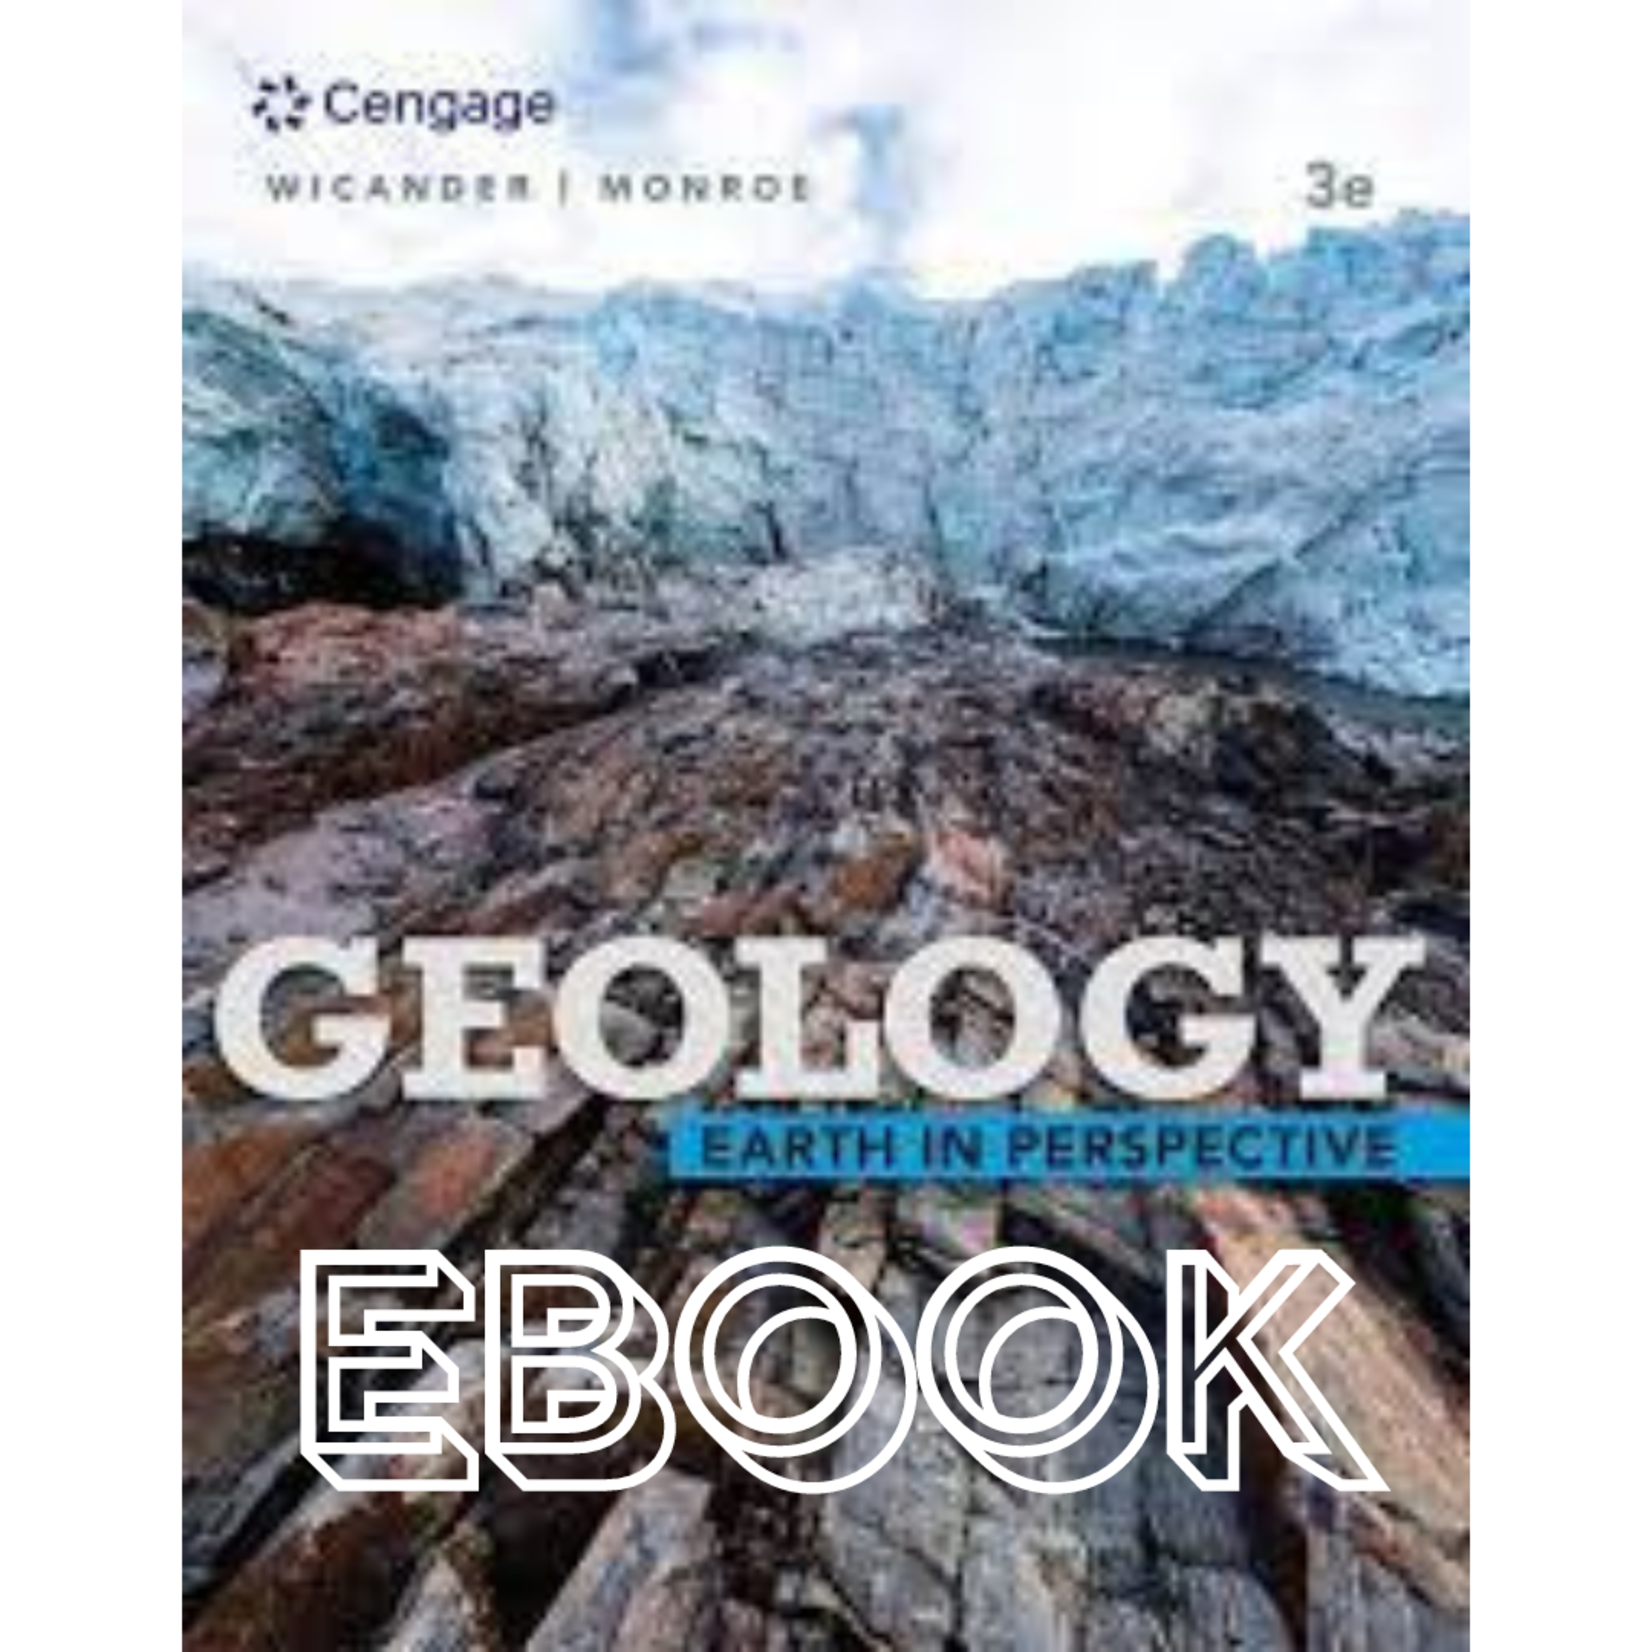 Cengage Geology Earth in Perspective EBOOK